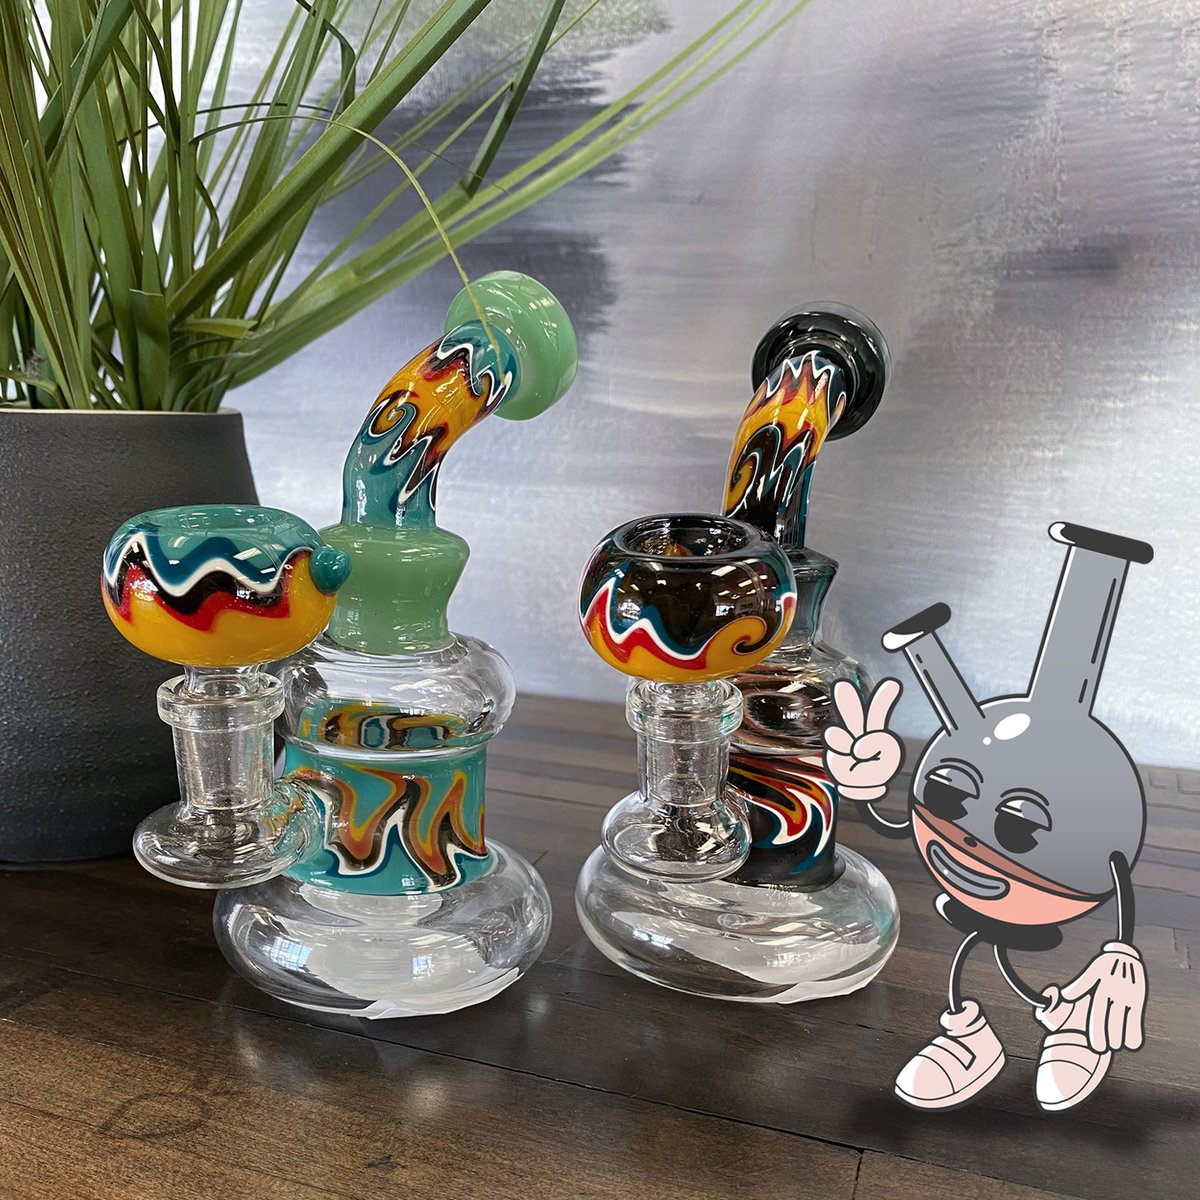 All our accessories are Bongo-approved✌ #420MangoFriends 
P.S. 4/20 Mango Madness STARTS TODAY!!😱🥭 #okcannabis #cannabiscommunity #oklahomacannabis